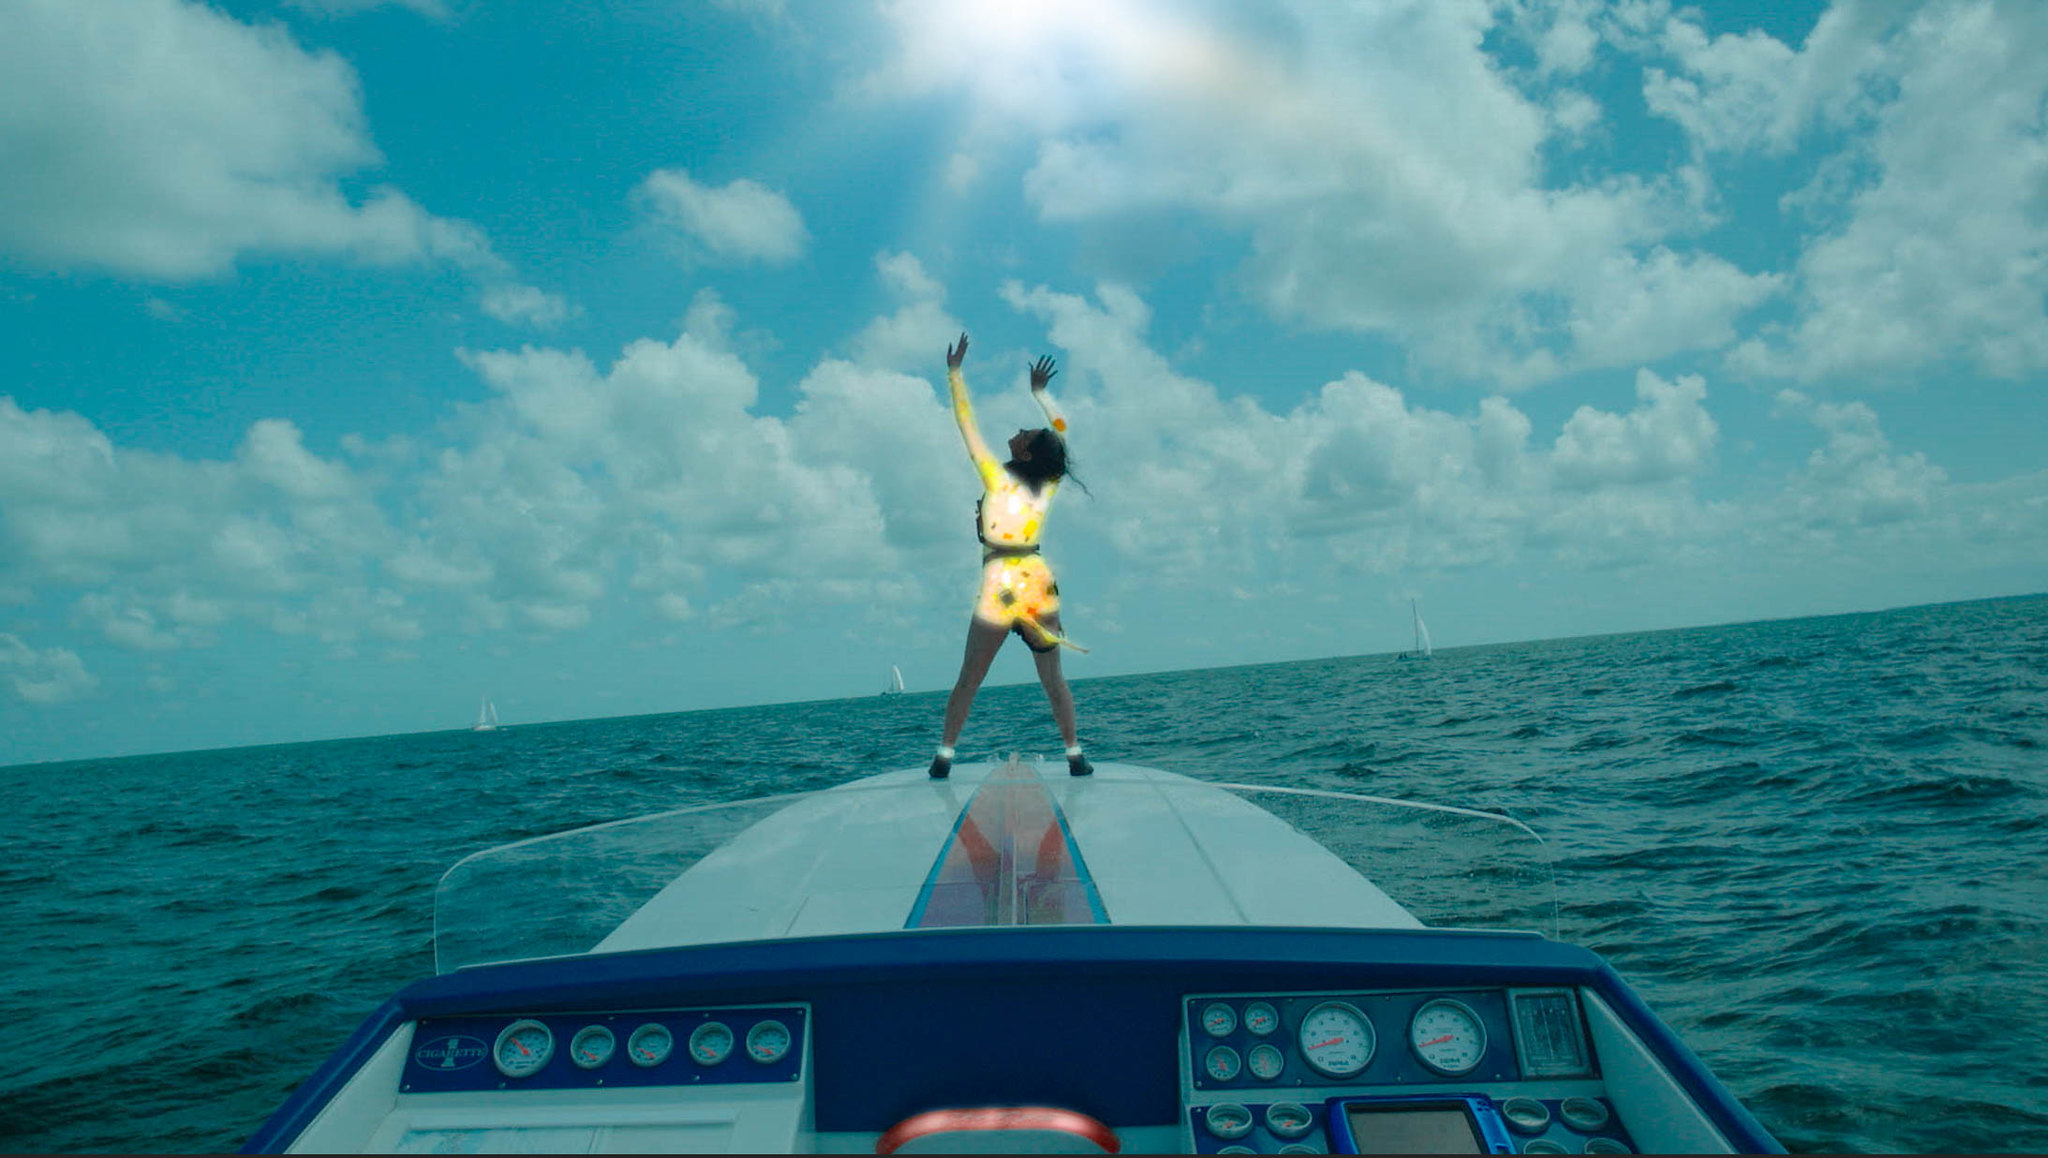 Omniboat: A Fast Boat Fantasia 2020 Movie - Film Review